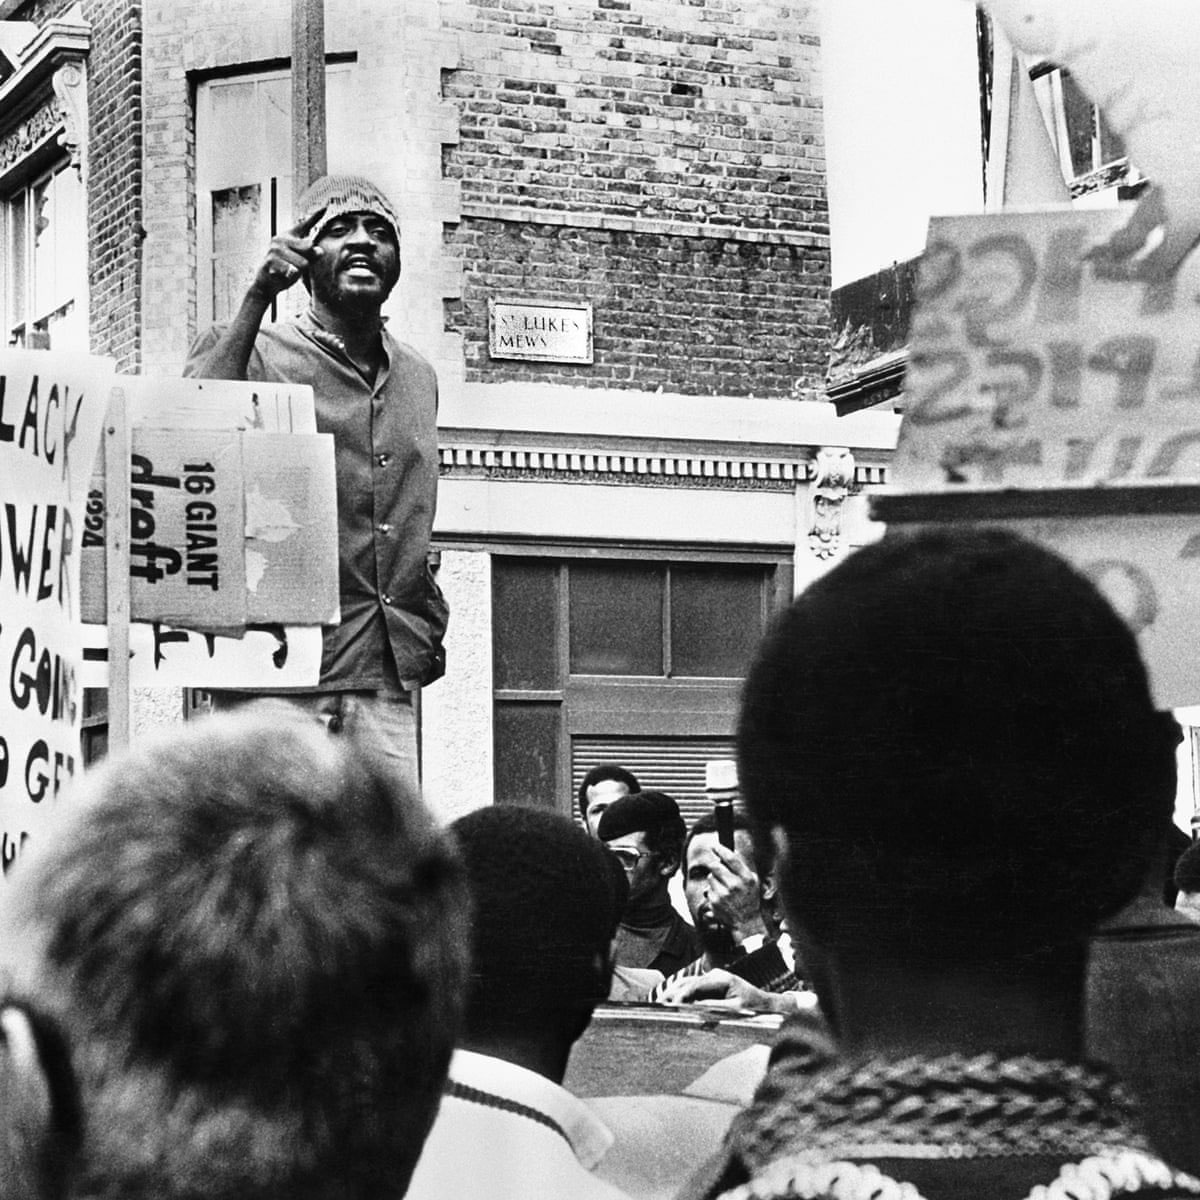 Civil rights activist Darcus Howe addressing a rally for the Mangrove Nine in Notting Hill, London, 1971. Howe, one of the Mangrove Nine, was charged with “incitement to riot” following a protest on 9 August 1970 against the police’s continuous harassment of the restaurant and its owner Frank Crichlow. All nine were acquitted of this charge in the trial at the Old Bailey, which ended in December 1971. Photo Horace Ové.